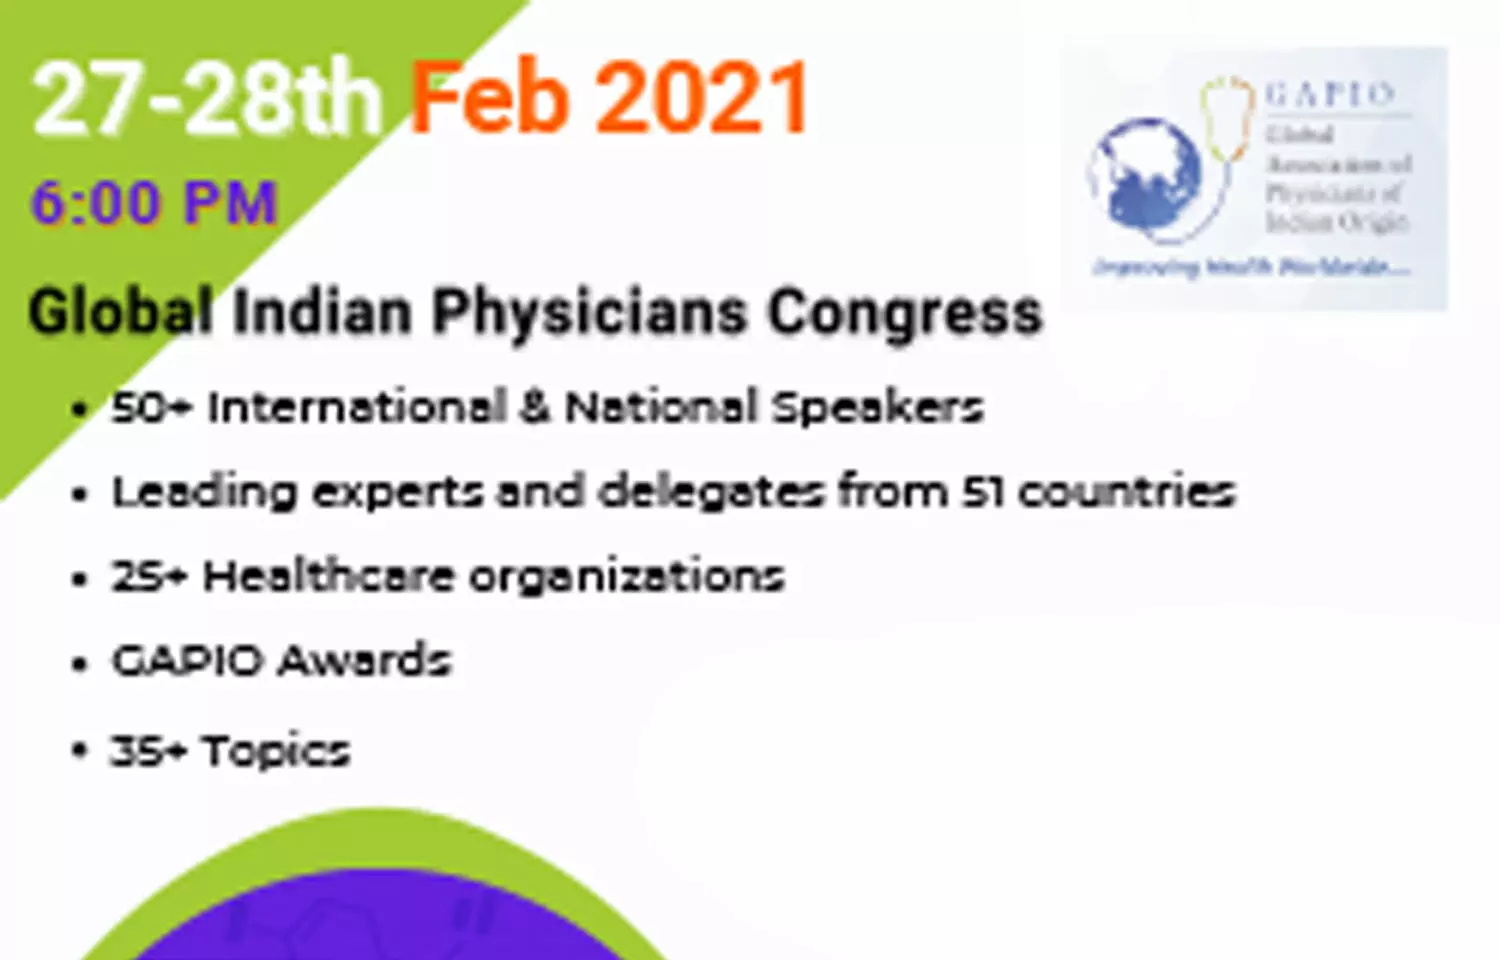 Global Indian Physicians Congress 2021 organized by GAPIO to go Virtual on February 27, 28